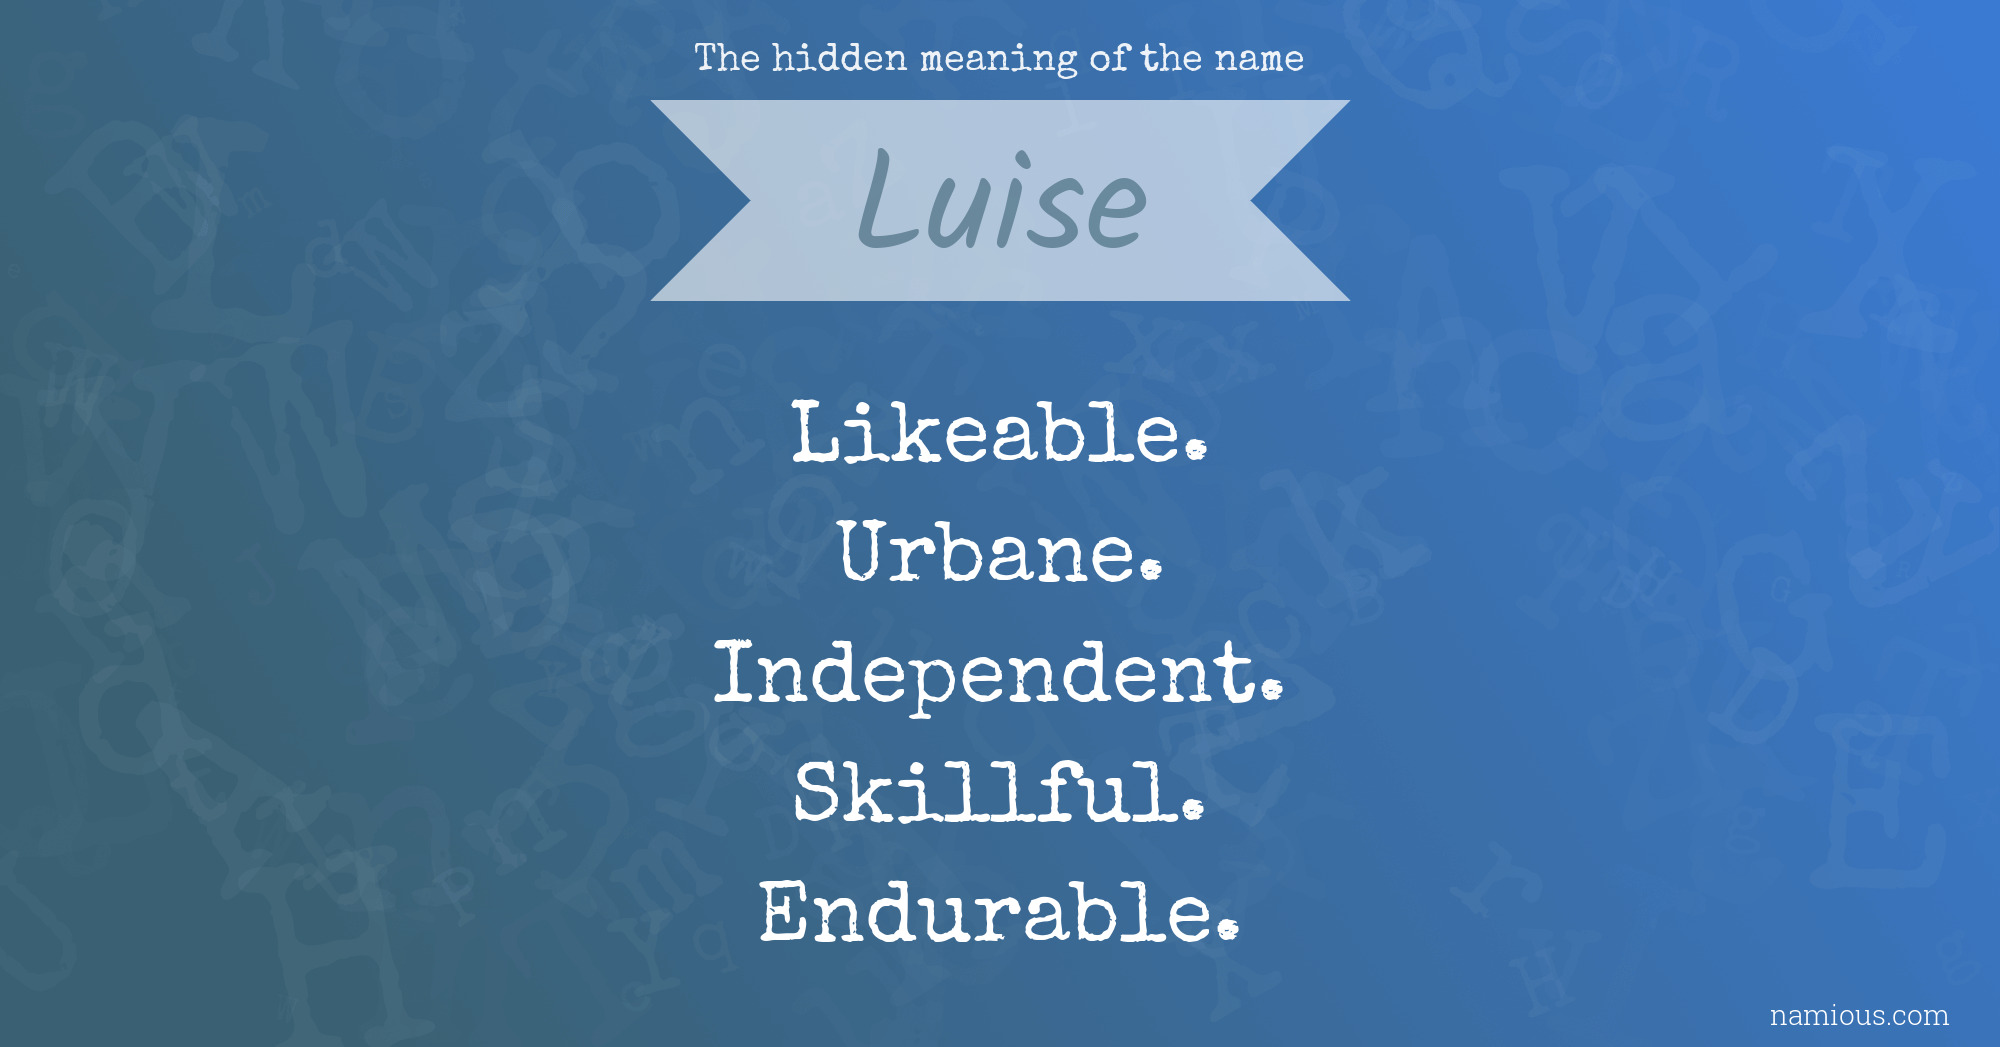 The hidden meaning of the name Luise